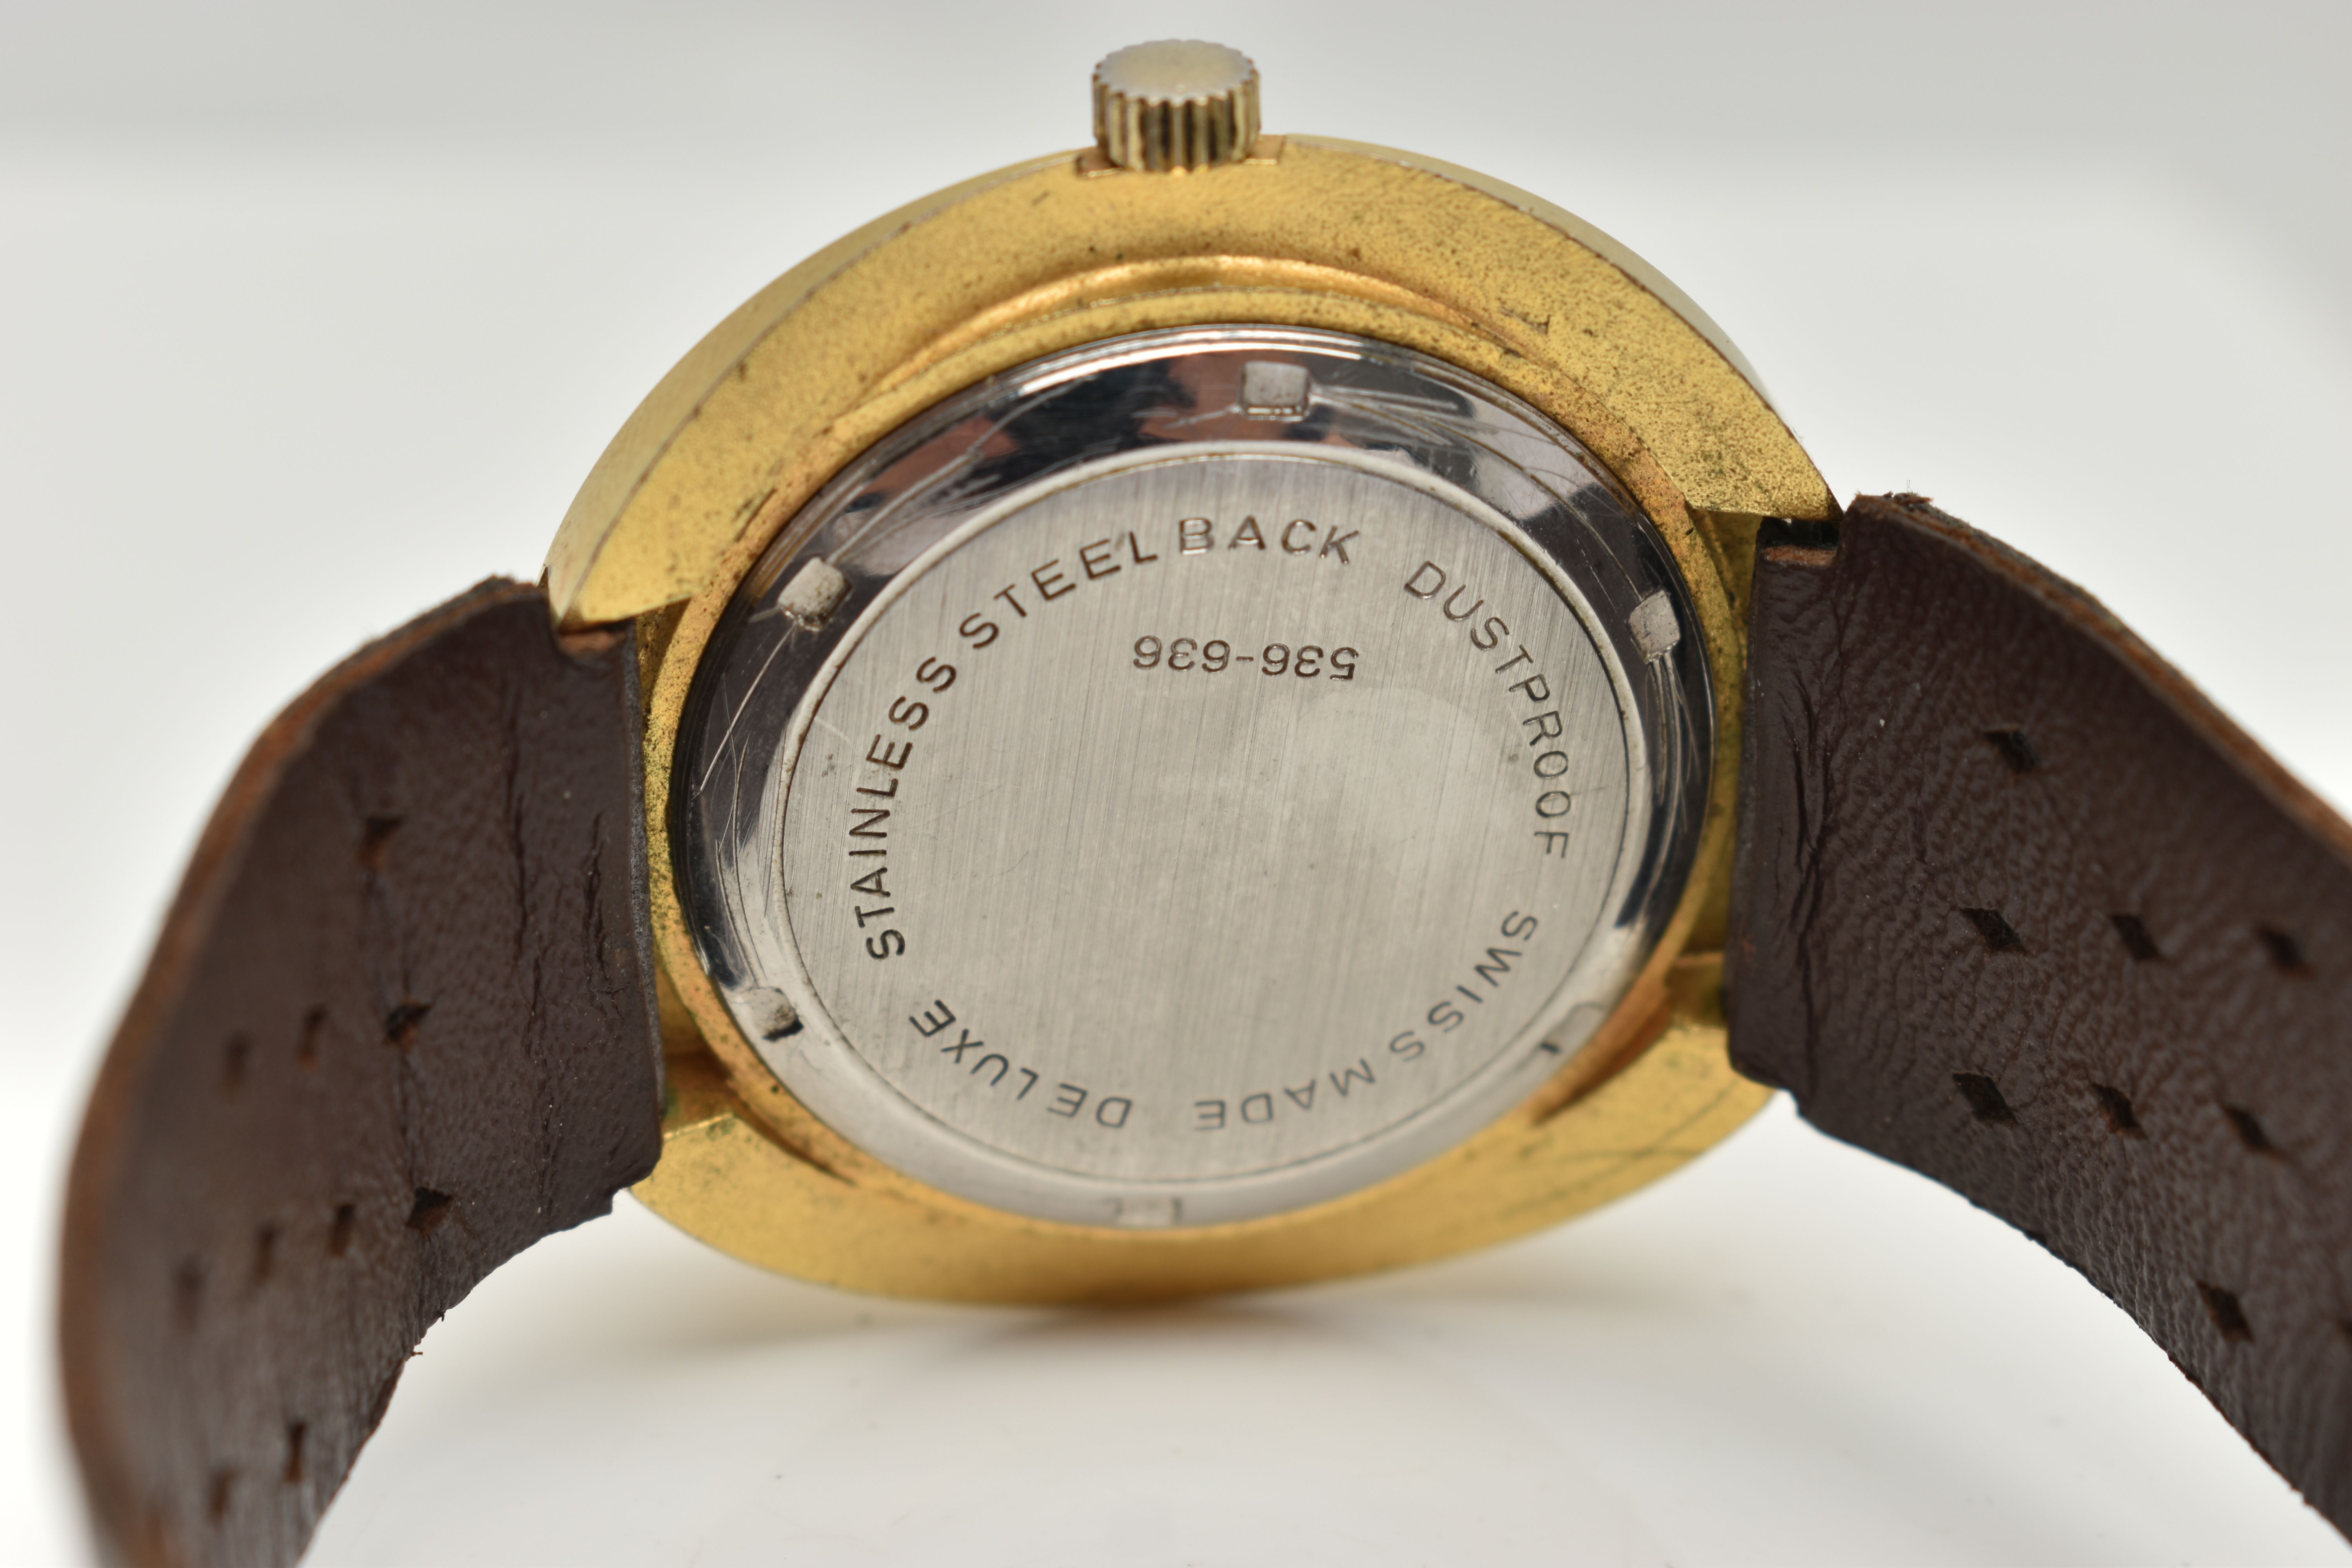 A VINTAGE JOWISSA DIGITAL WRISTWATCH, brown and orange dial with white hands, date window, the - Image 5 of 6